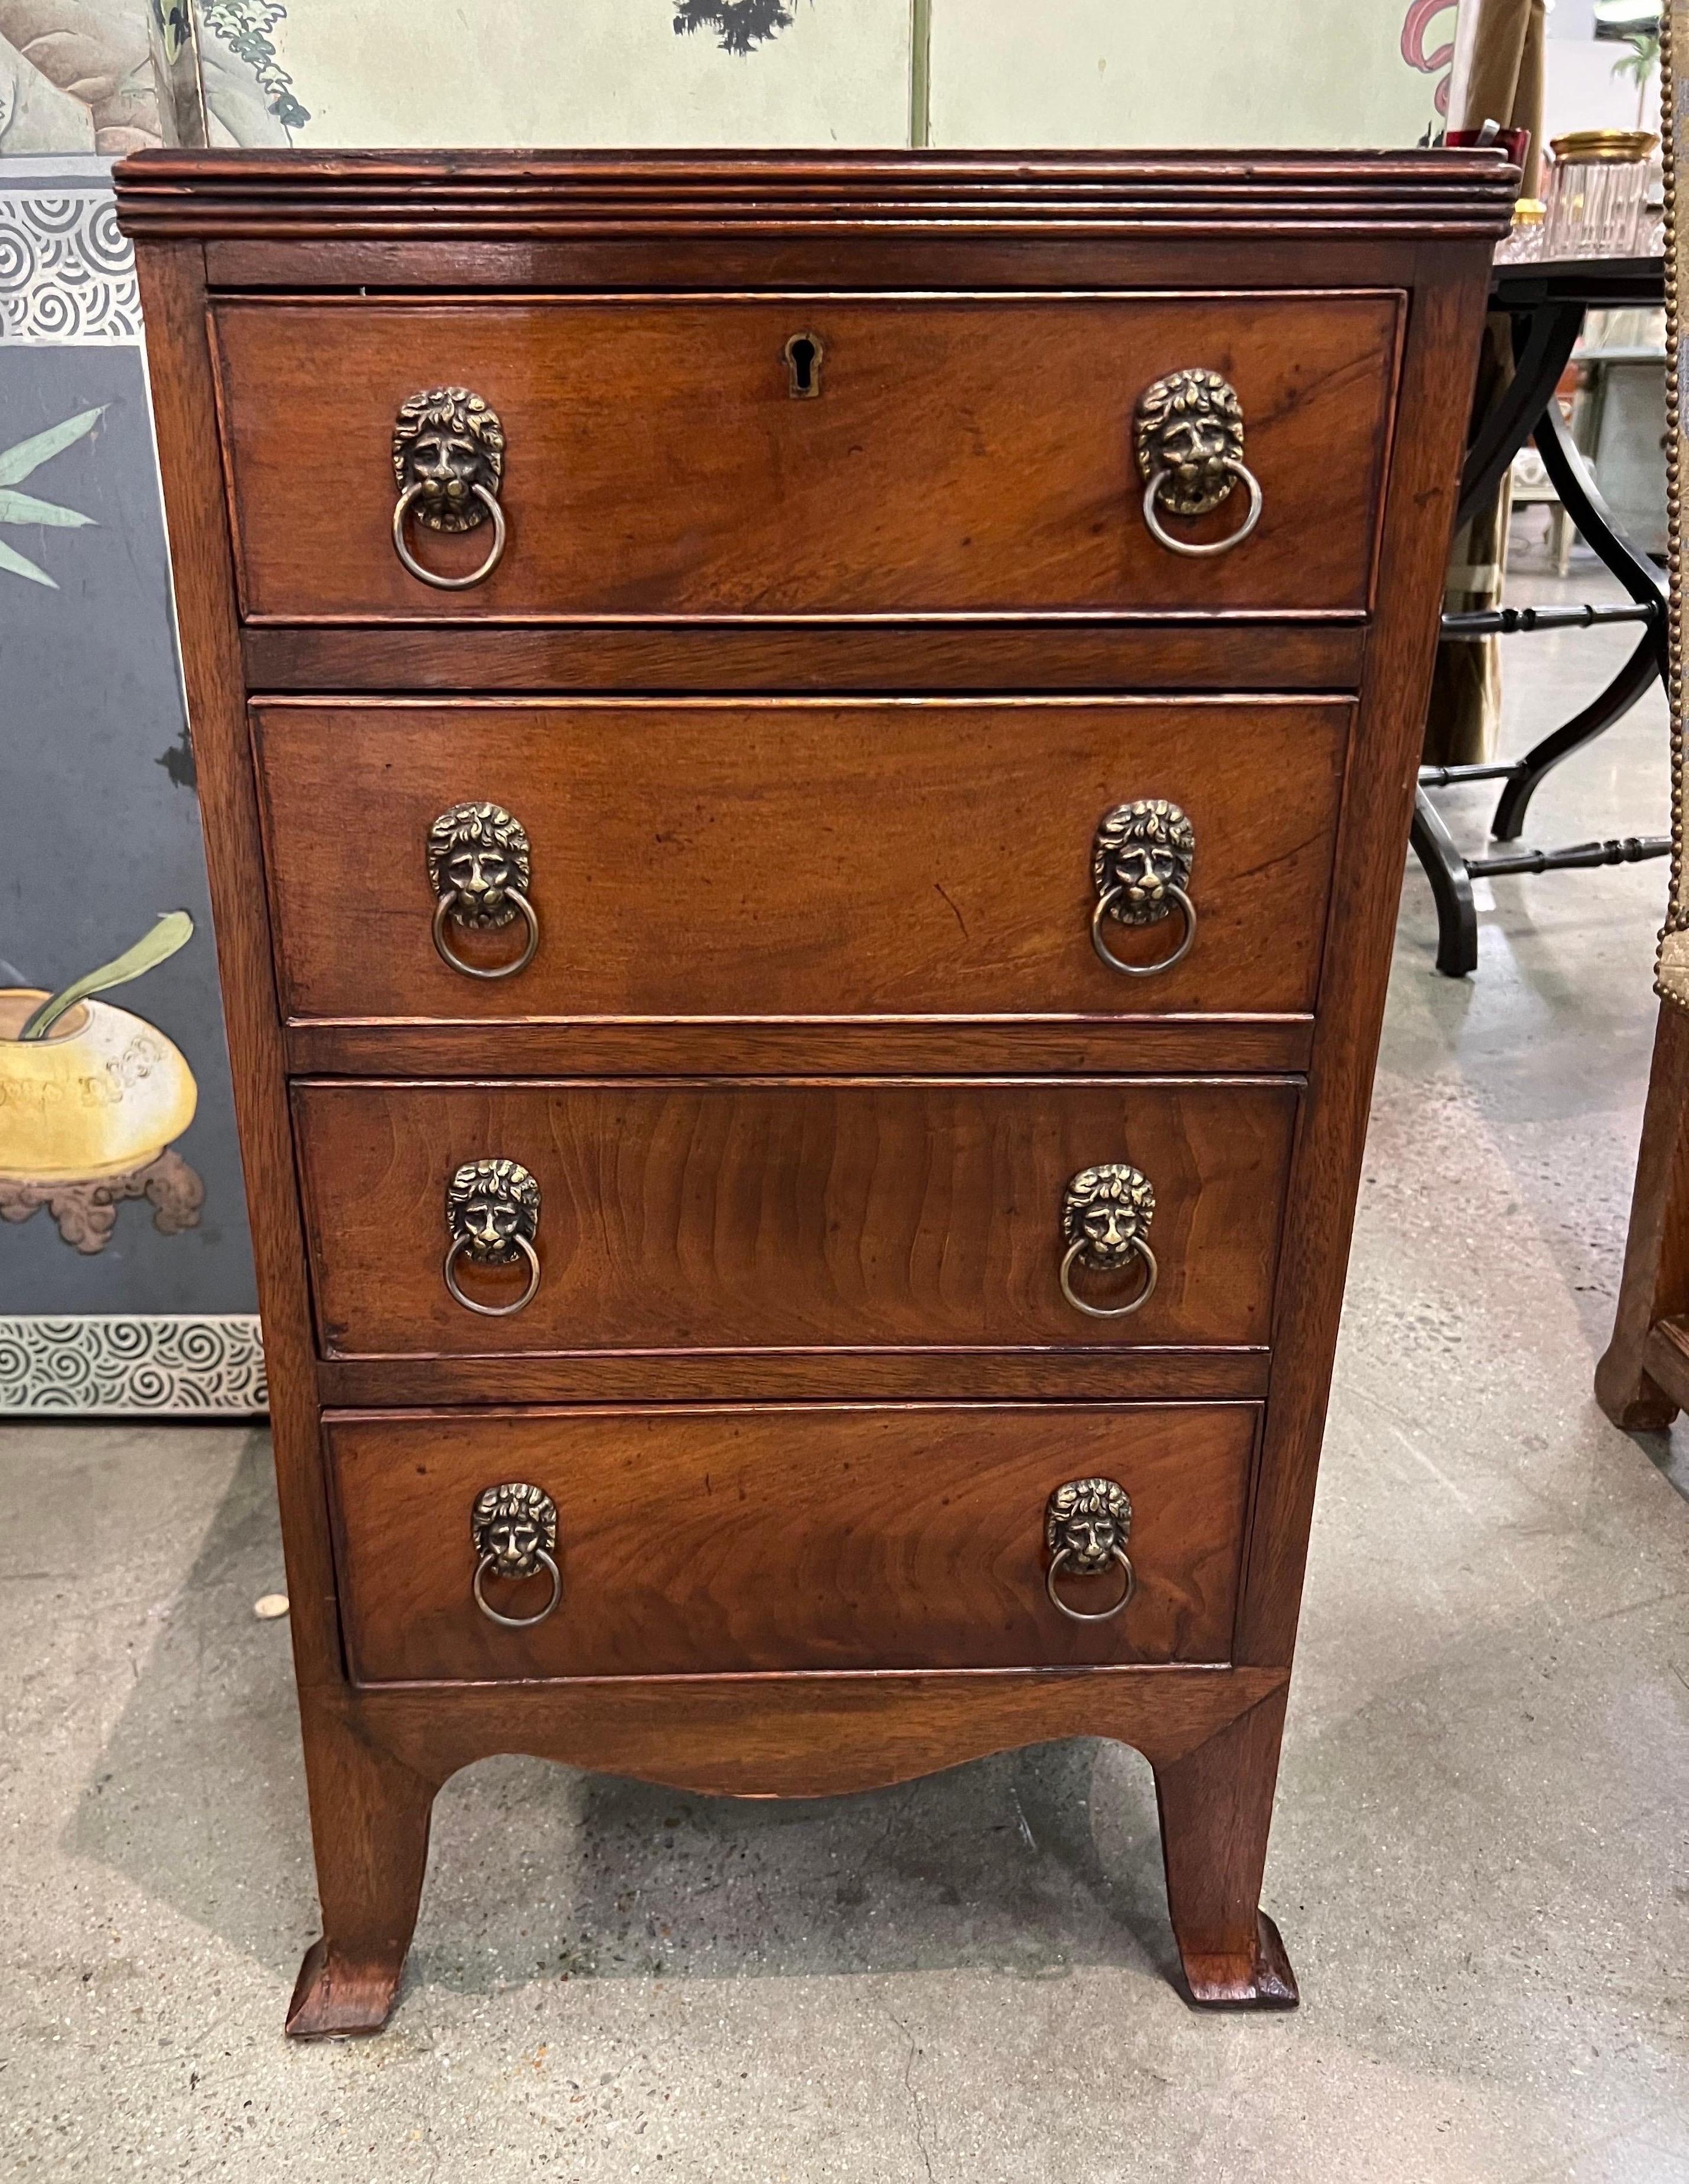 Great little Georgian 4 drawer mahogany bedside chest with lion pulls and French feet.